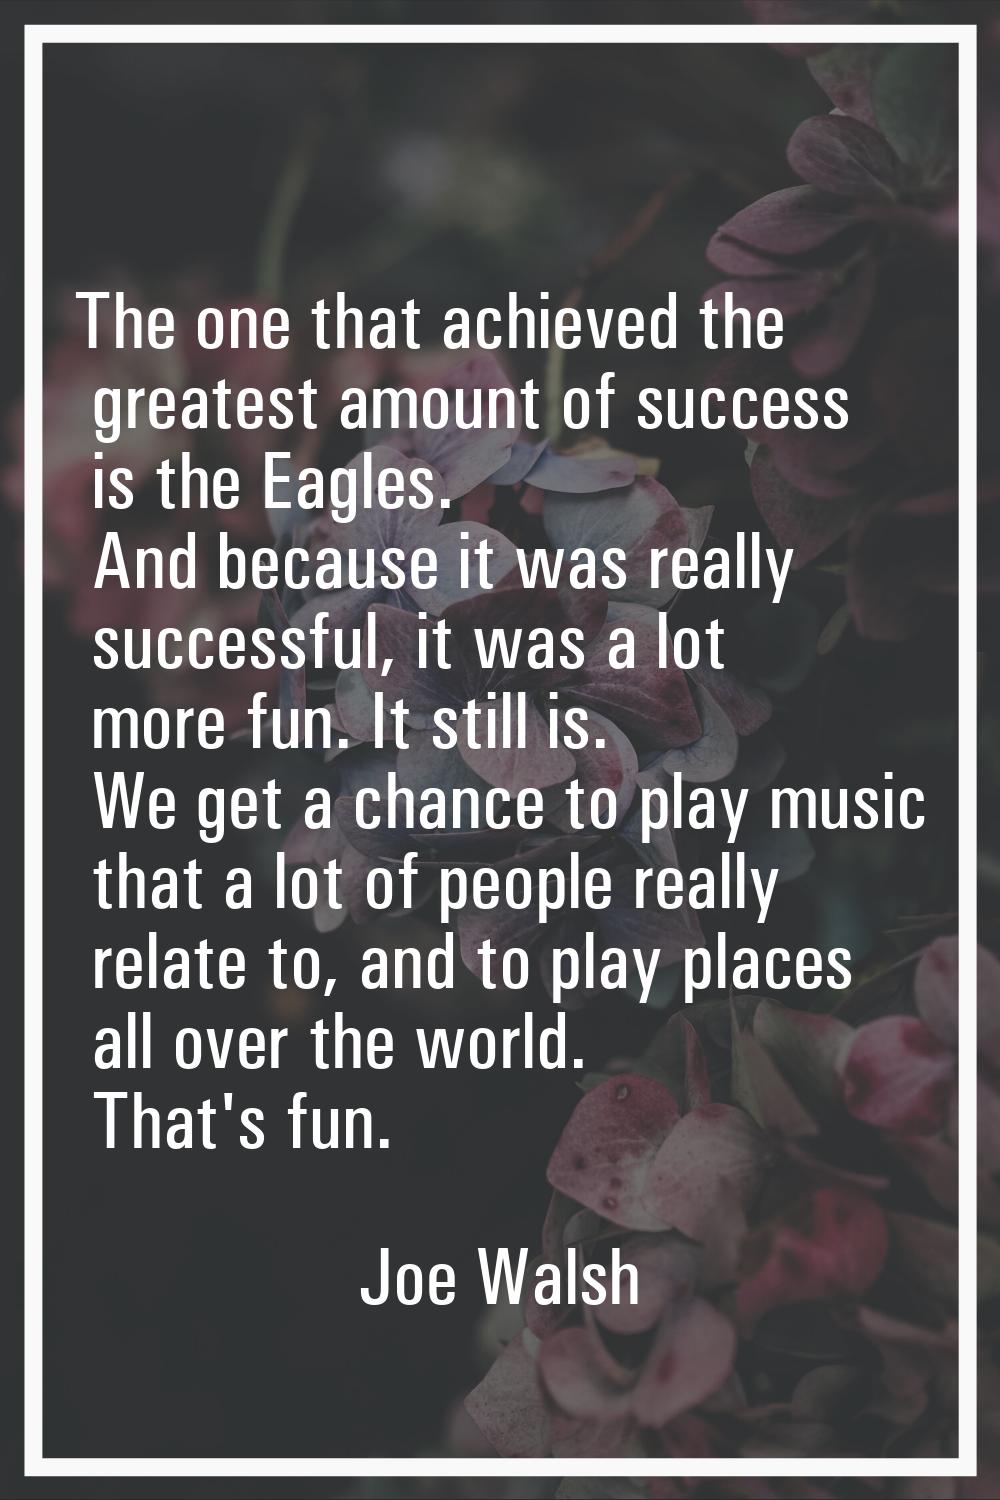 The one that achieved the greatest amount of success is the Eagles. And because it was really succe